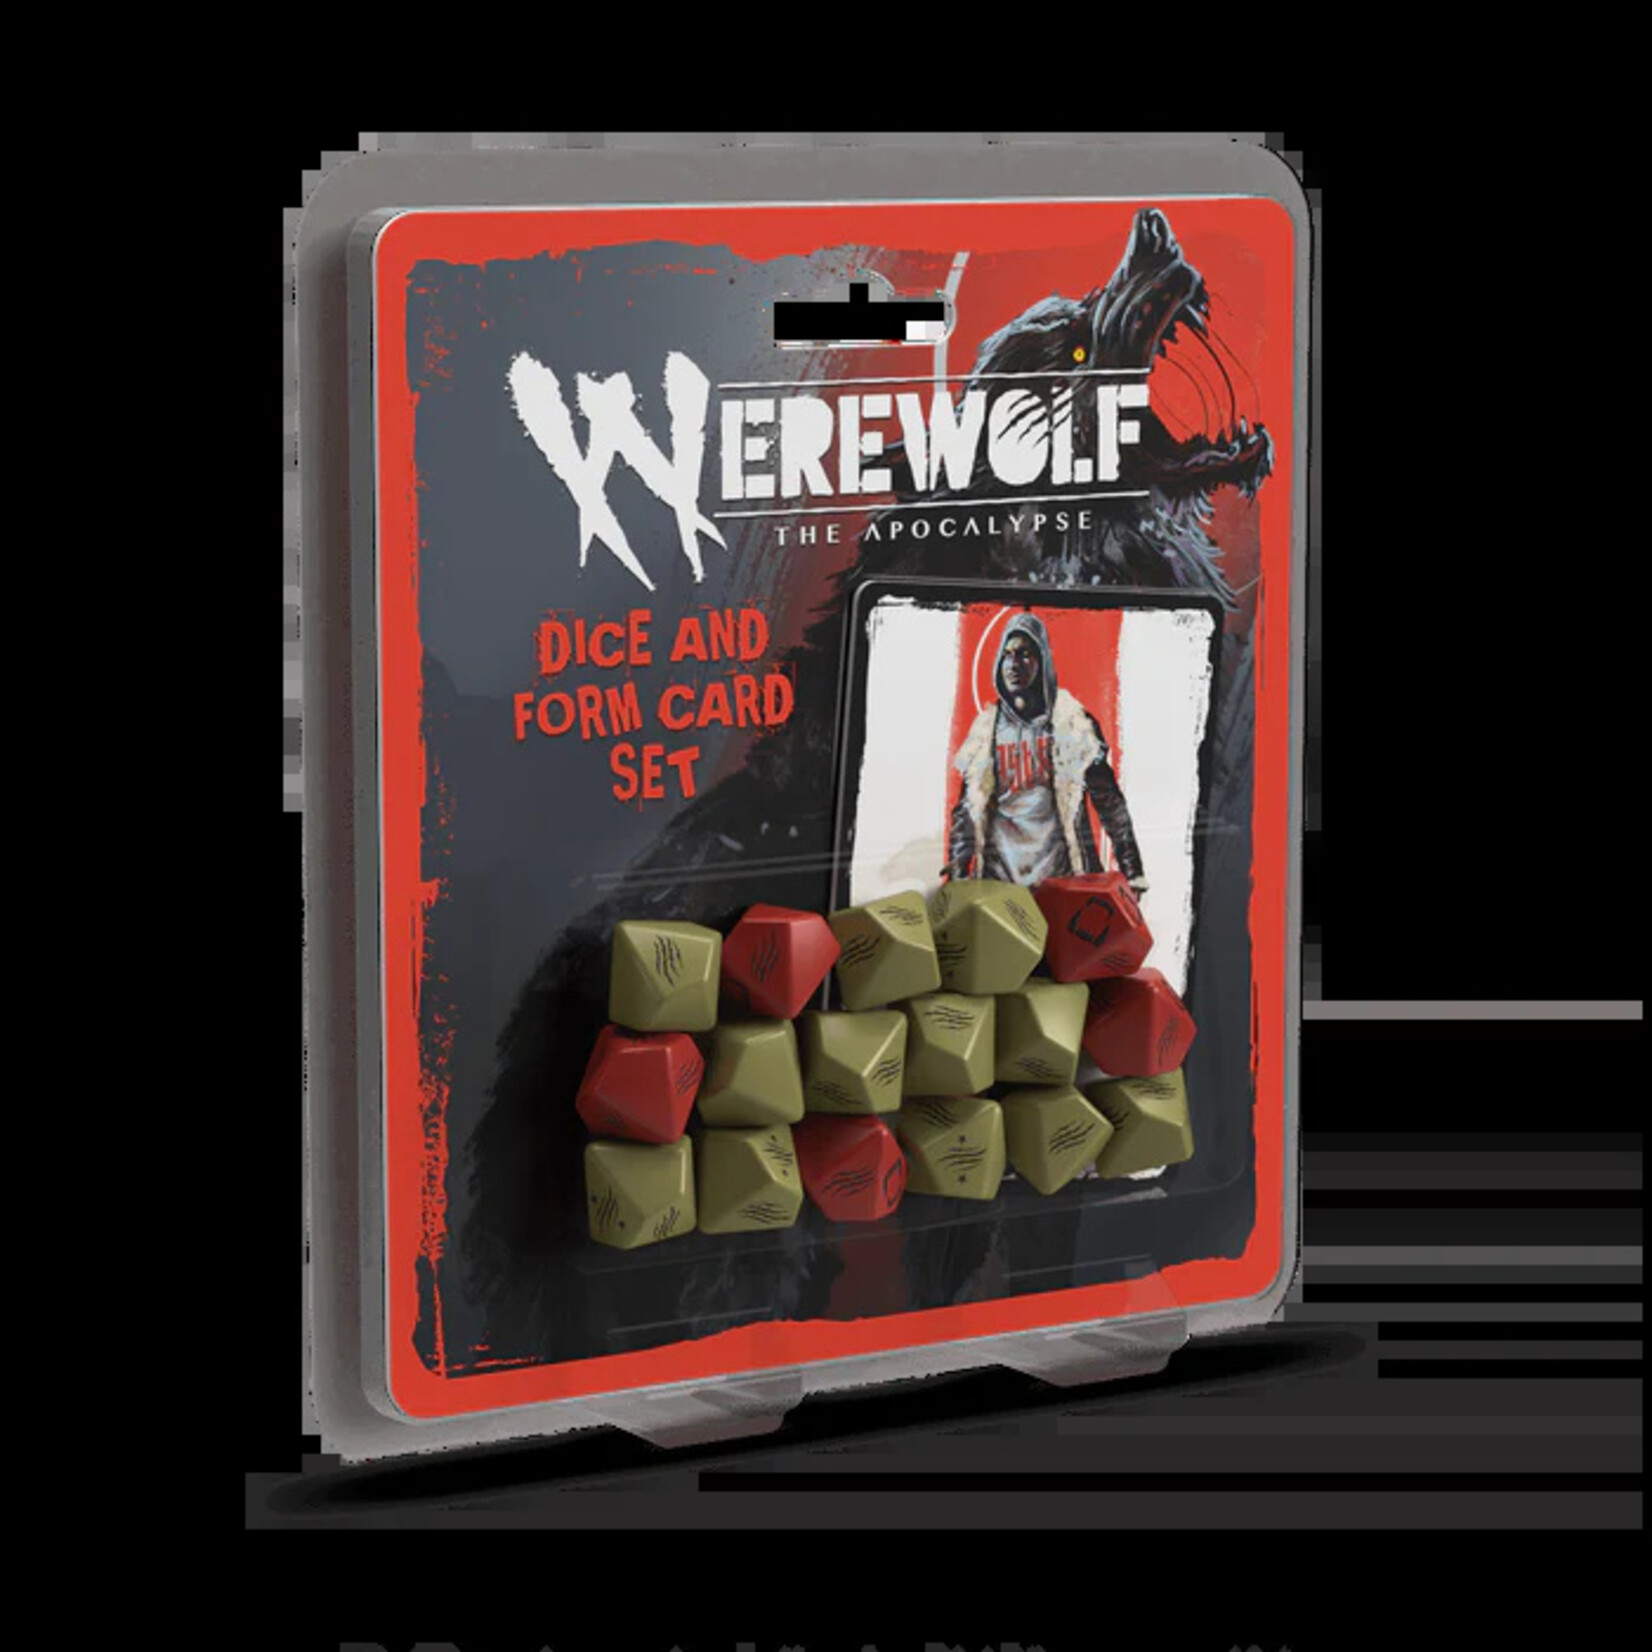 Werewolf The Apocalypse RPG: Dice and Form Card Set